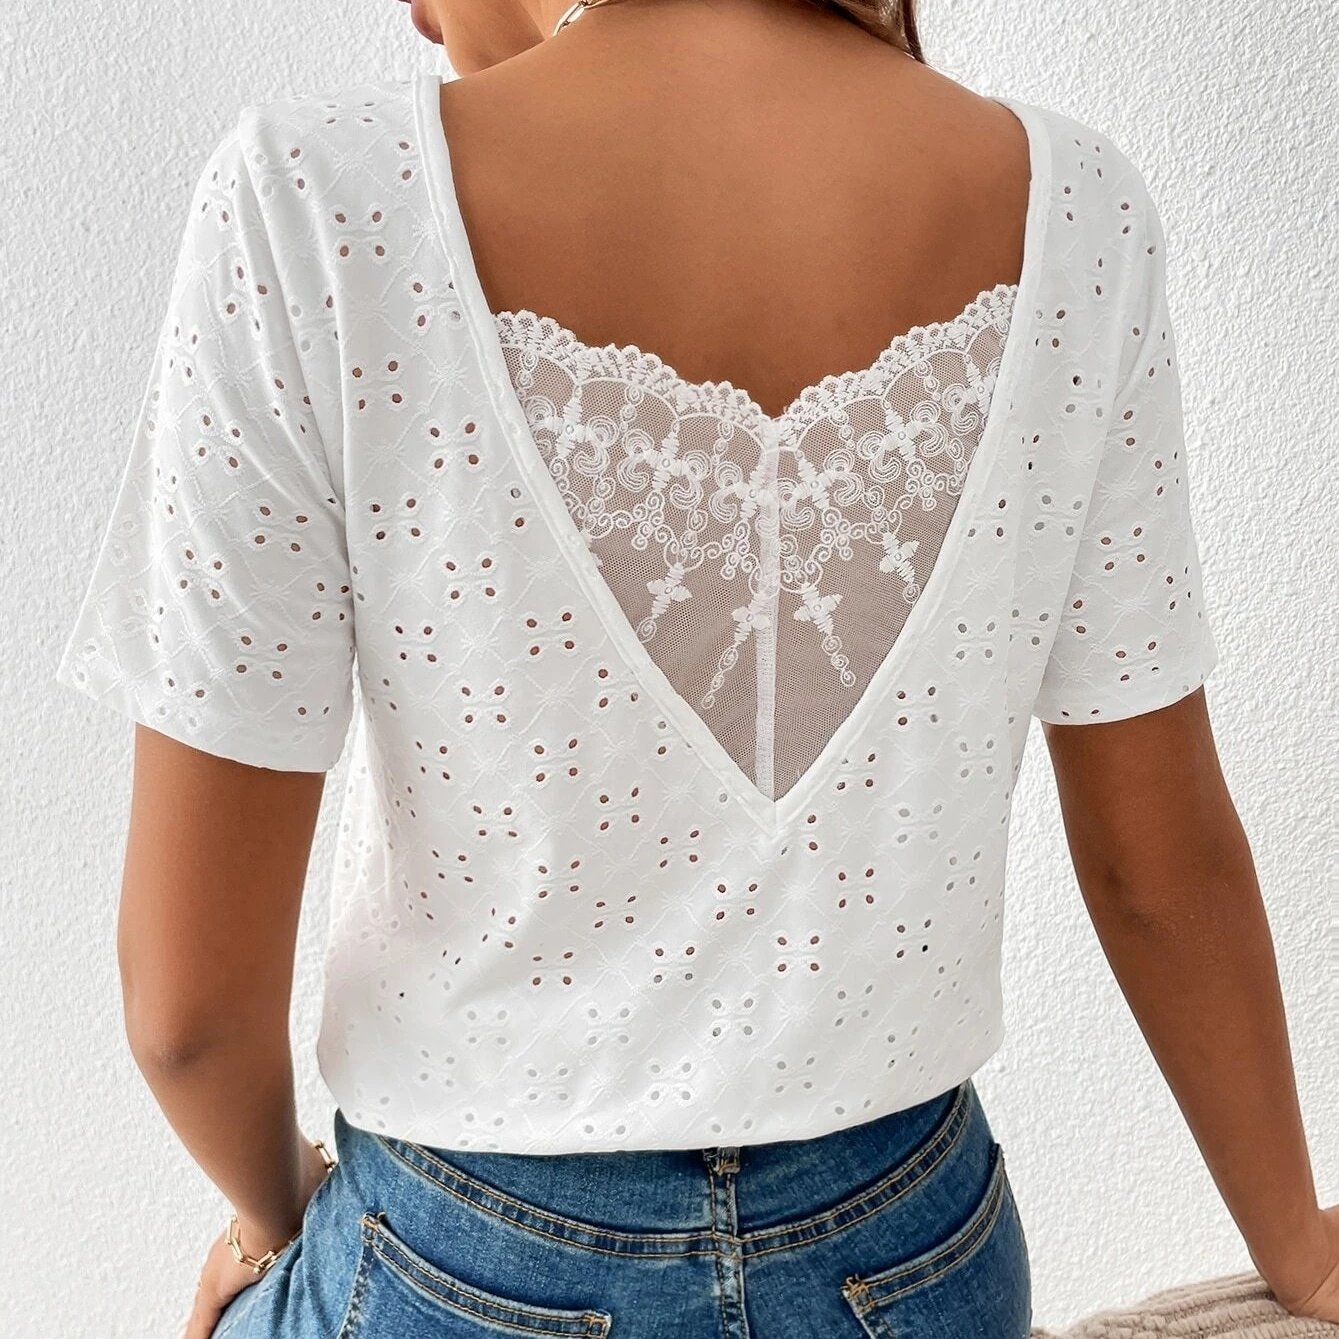 Contrast Lace Eyelet Embroidery Tee - M